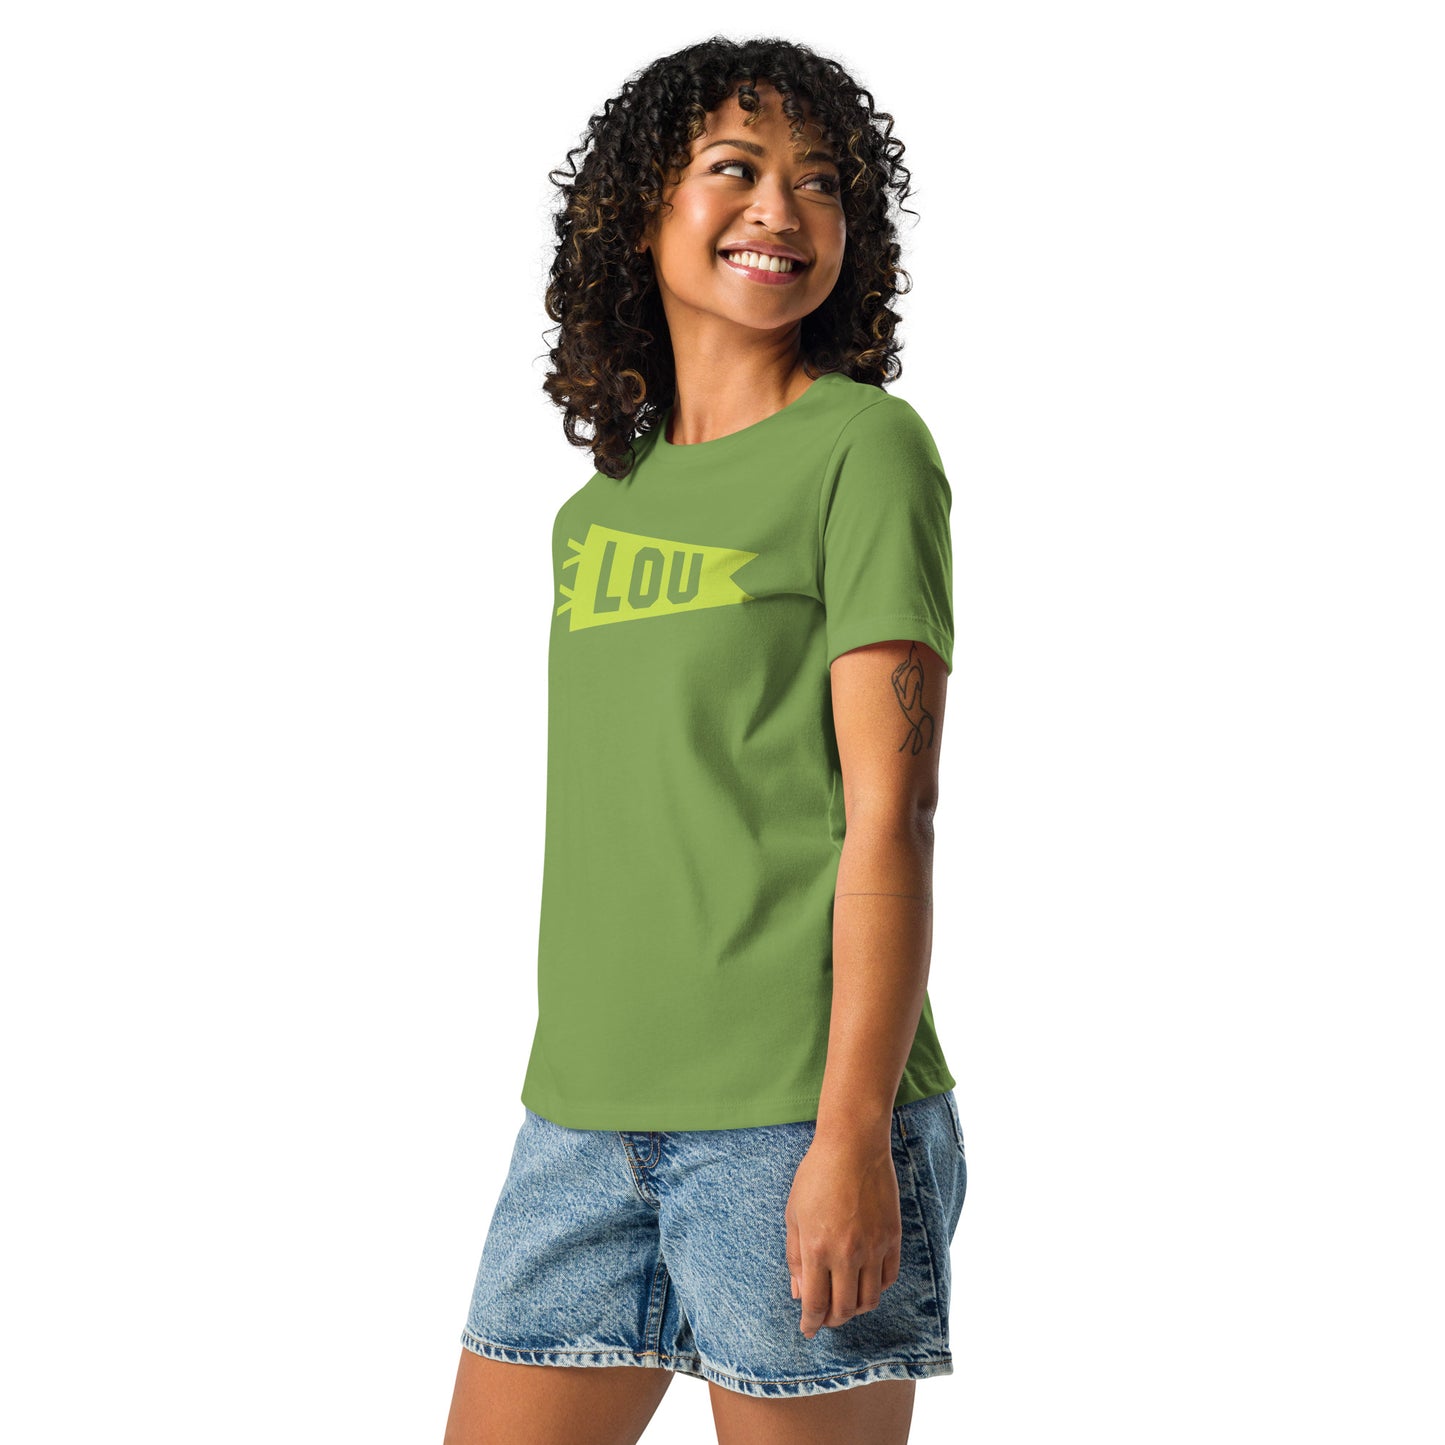 Airport Code Women's Tee - Green Graphic • LOU Louisville • YHM Designs - Image 07